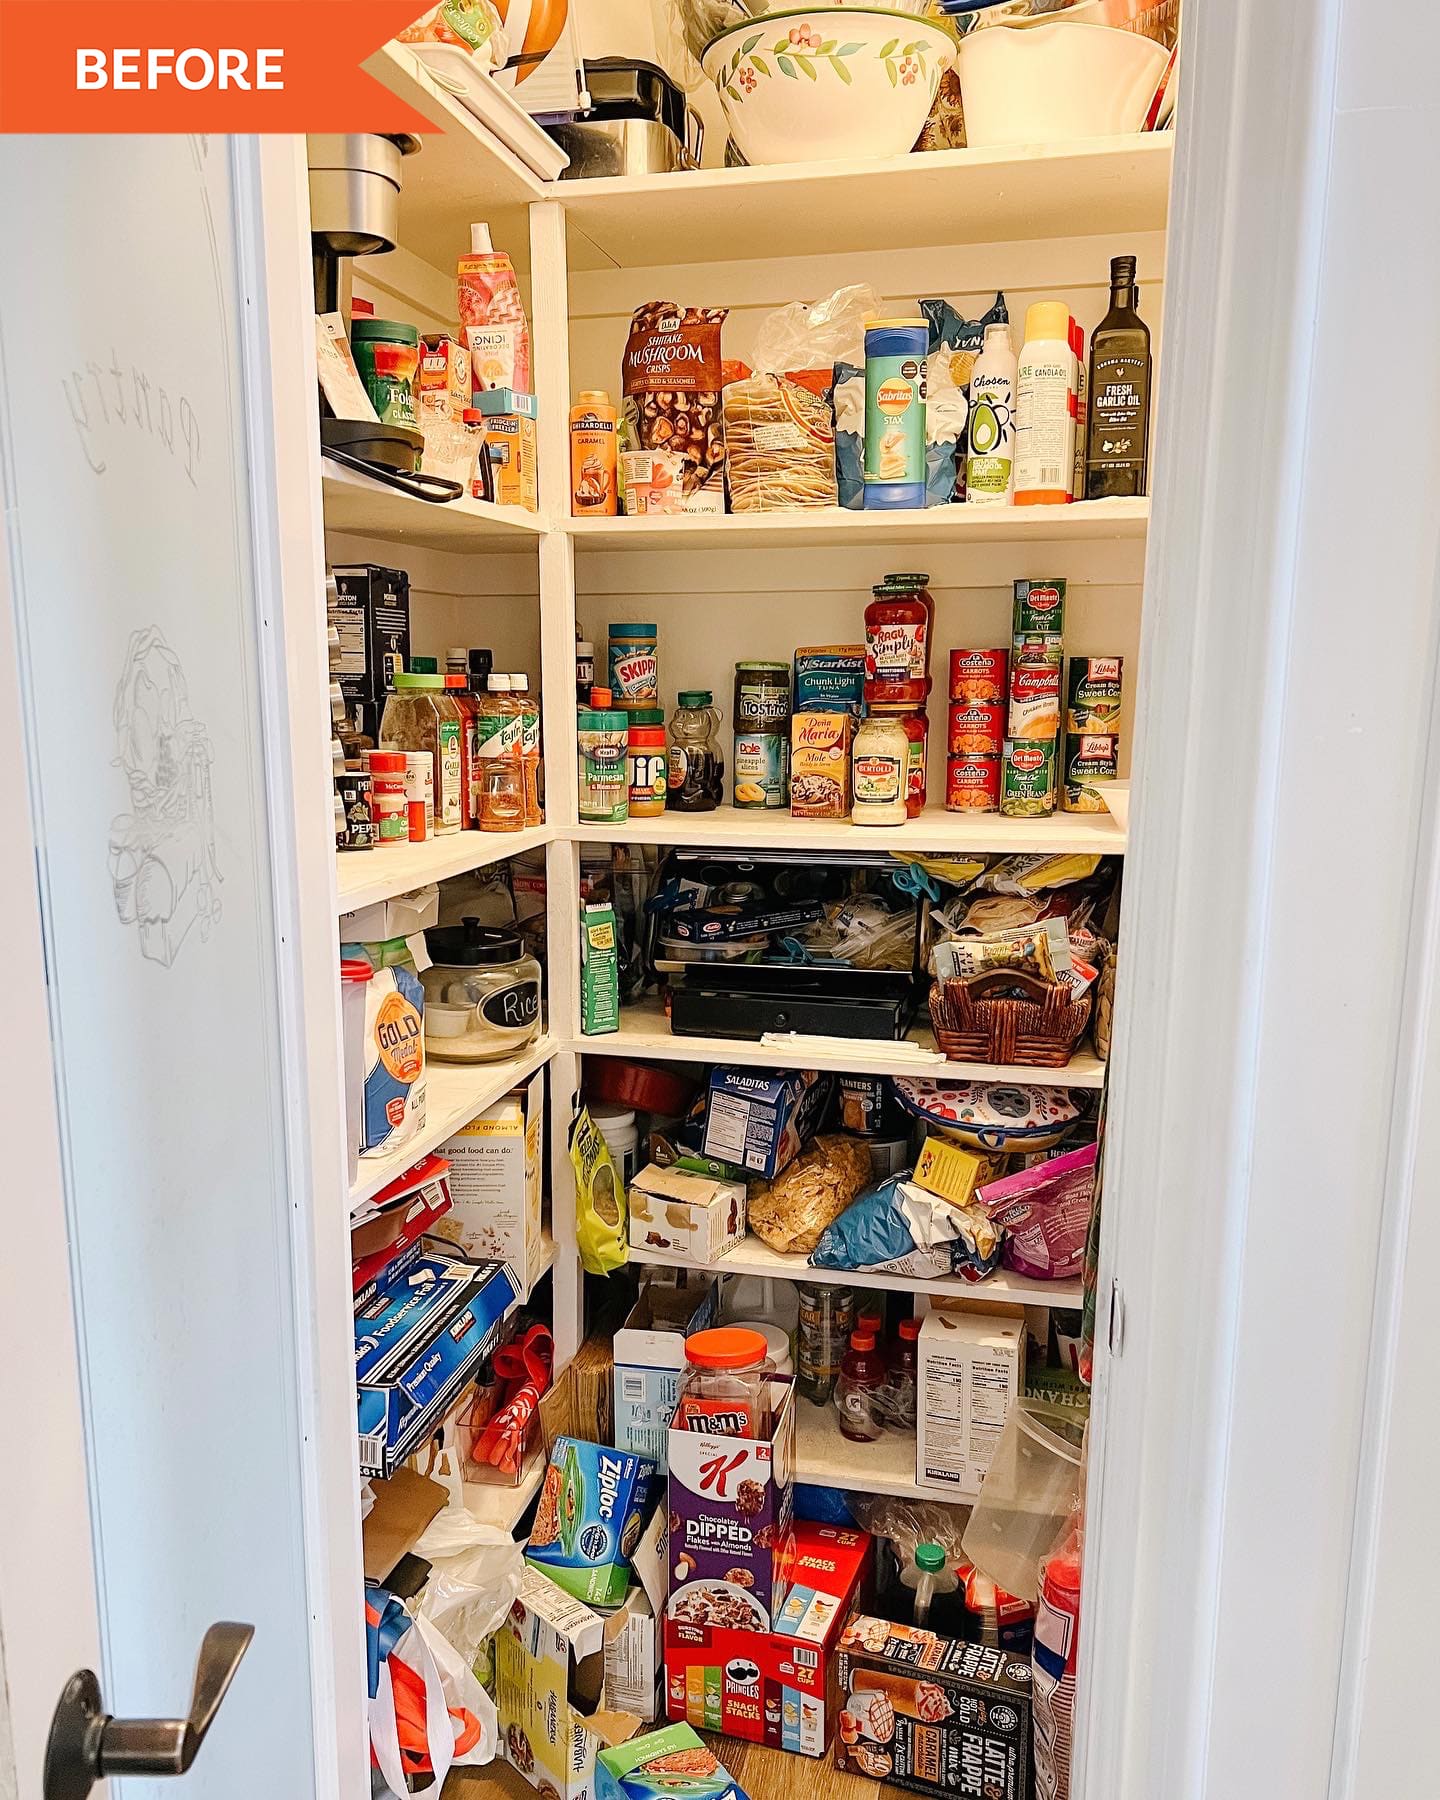 Storing Appliances in a Pantry - Declutter in Minutes